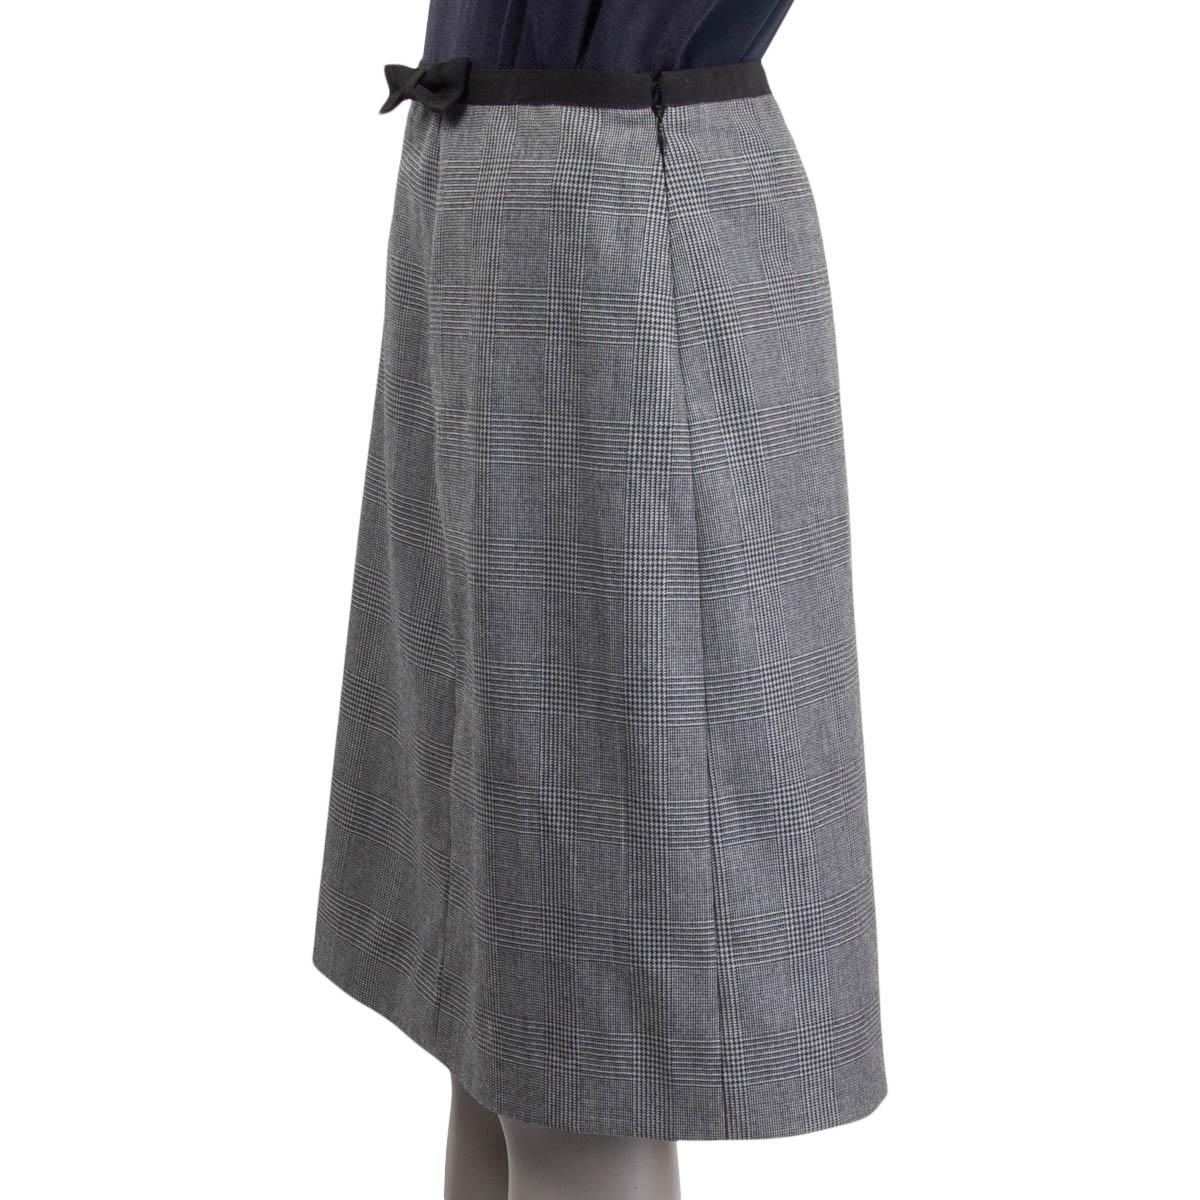 100% authentic Prada houndstooth plaid knee-length skirt in gray and black wool (100%). Embellished with a black bow on the front side. Opens with a concealed zipper and a hook on the side. Lined in black viscose (67%) and silk (33%). Has been worn